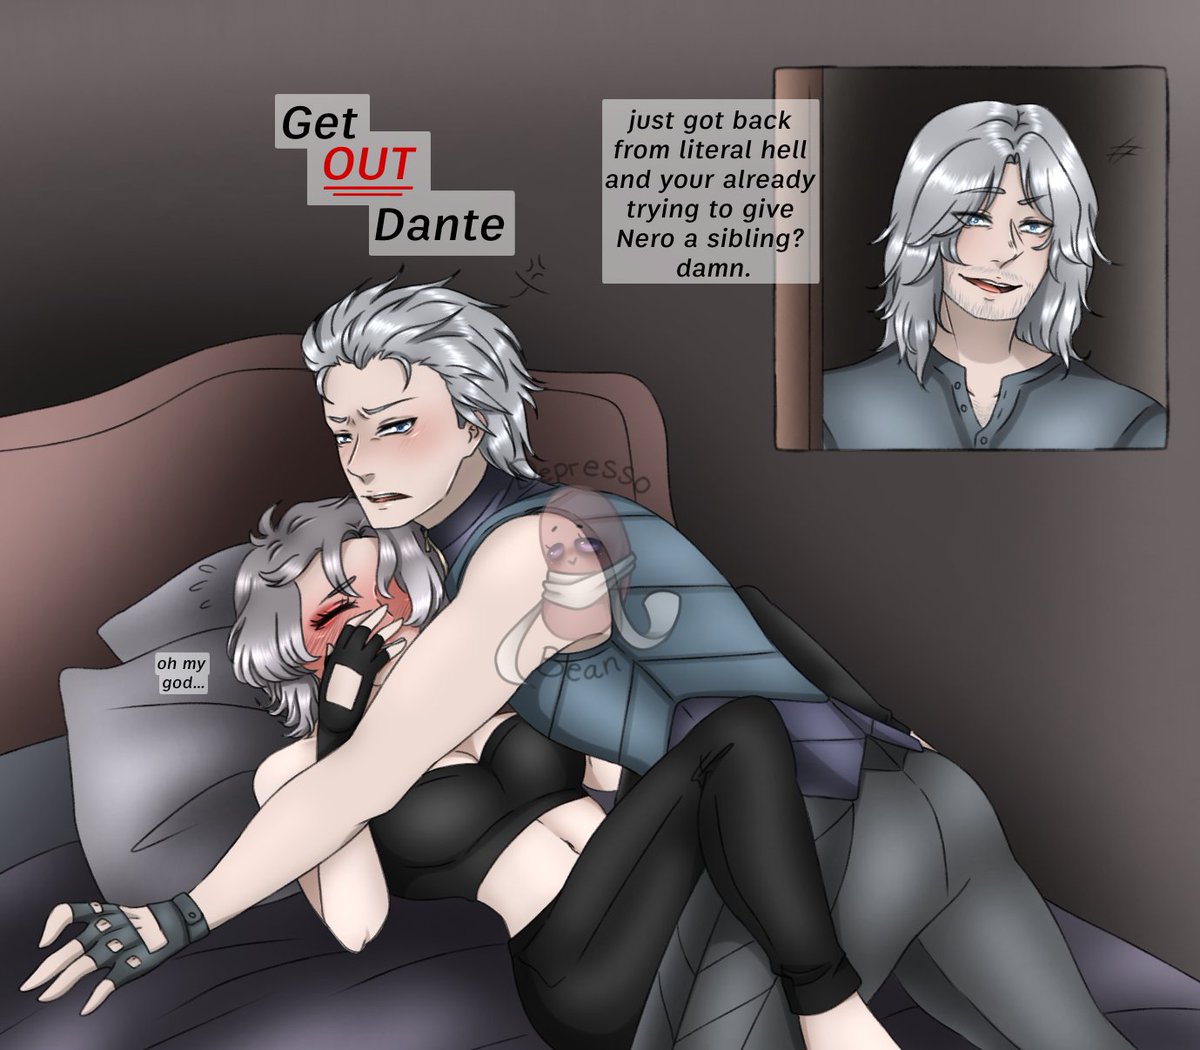 Trying to catch up. (Keyword: 'trying')

Small thing with Dante and Vergil coming back and Vergil just wants to spend time with Cecilia, making up some lost time. But ofc there's an interruption.

#dmc #ocxcanon #devilmaycry #dmc5  #Dantesparda #Vergilsparda #Dante #Vergil #art